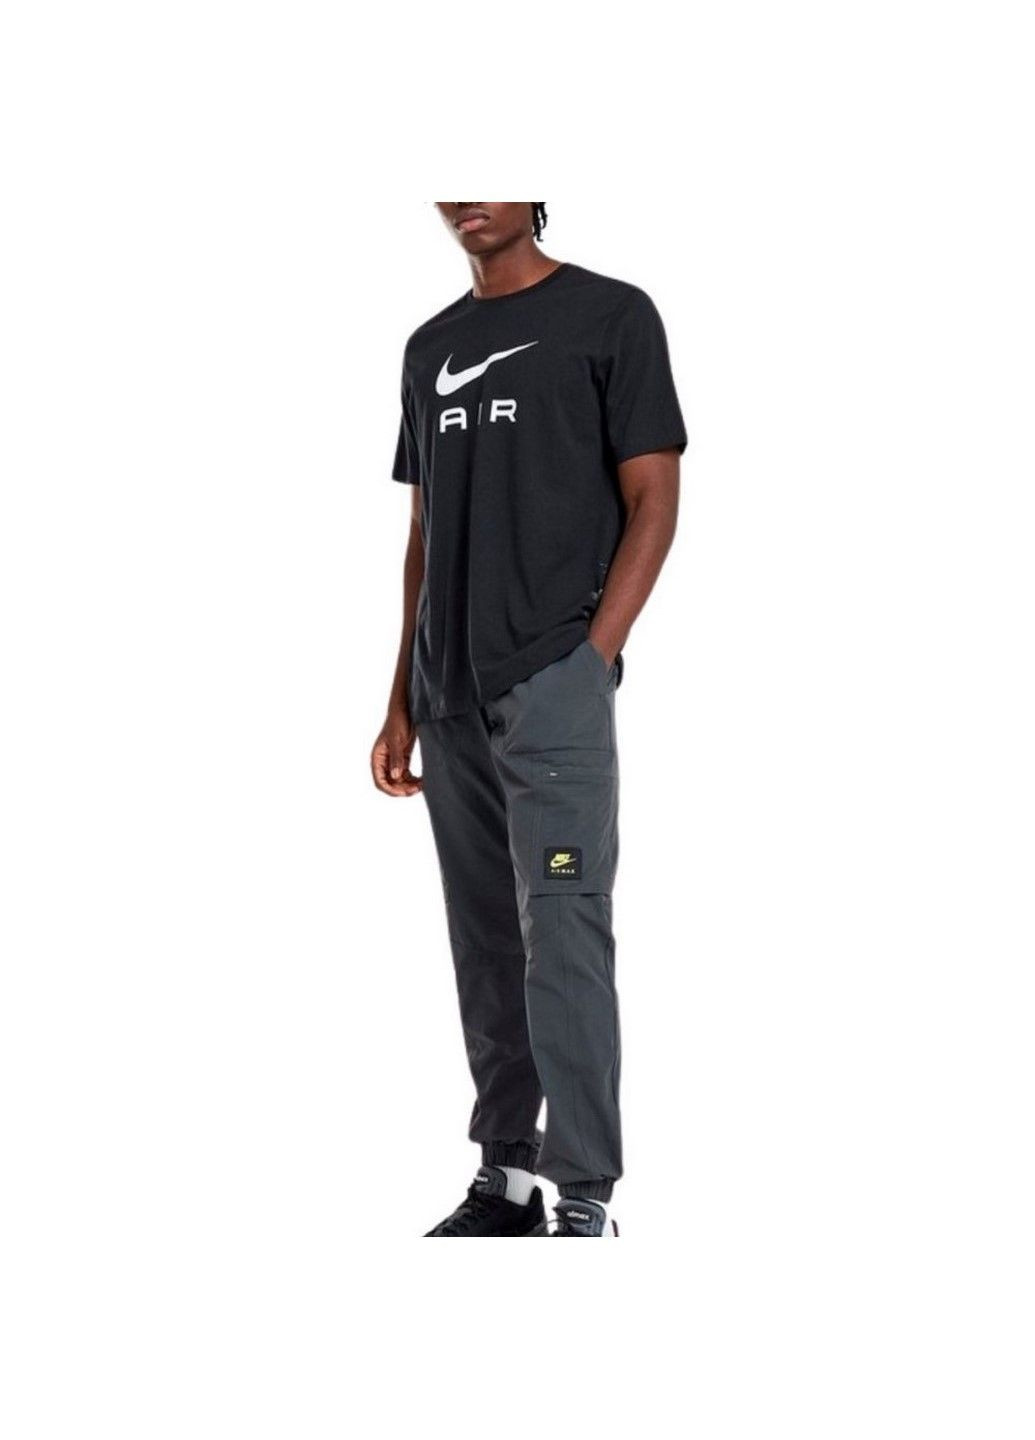 Штани M Nsw Air Max Wvn Cargo Pant FV5594-060 Nike (285794854)